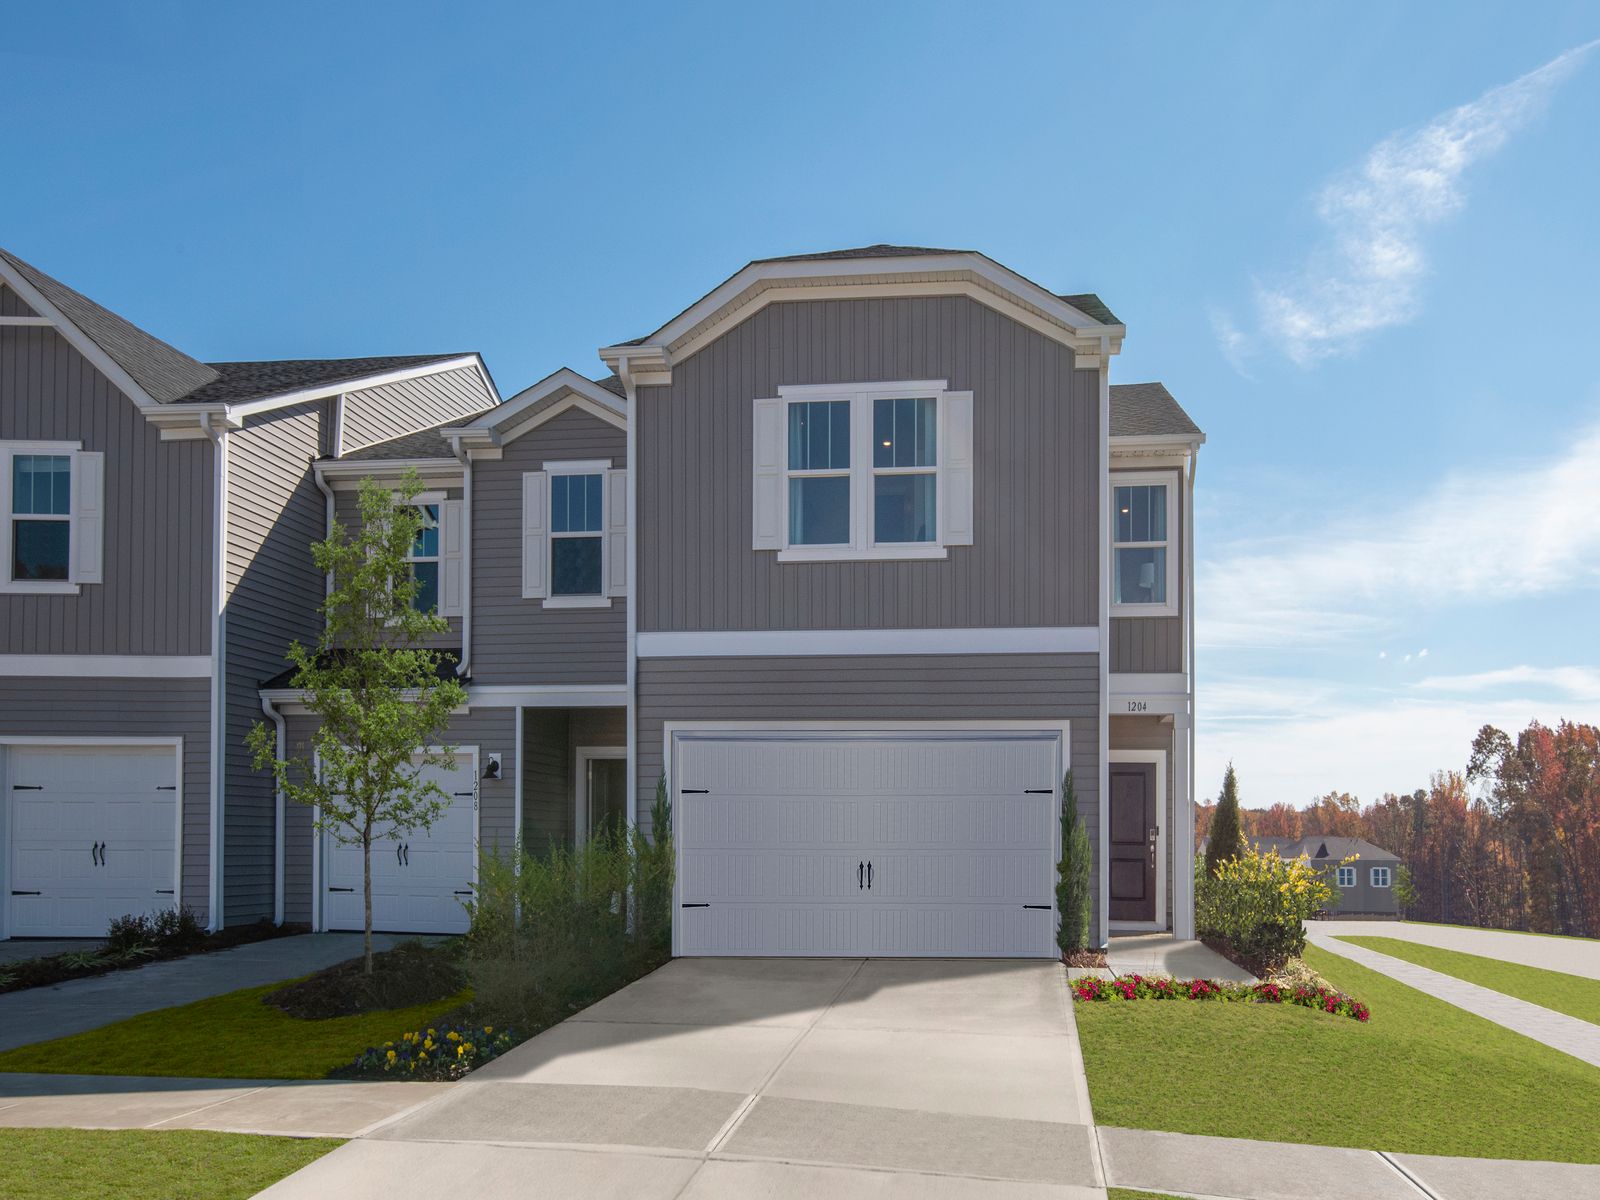 Welcome to the Opal Model at Belterra.